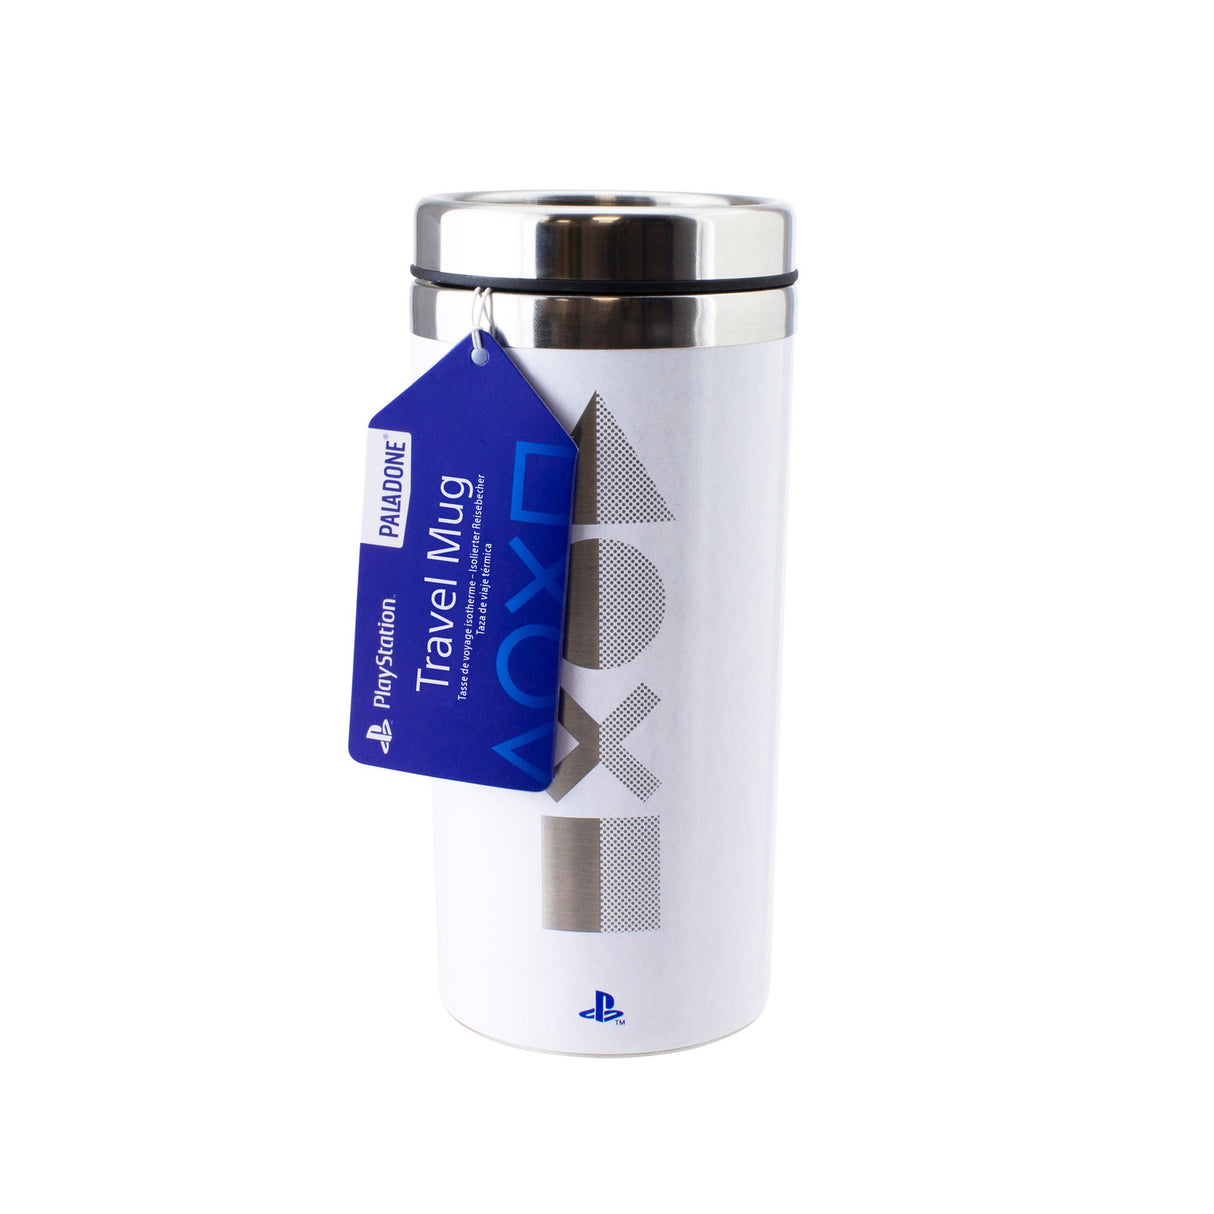 PlayStation Icons Thermobecher